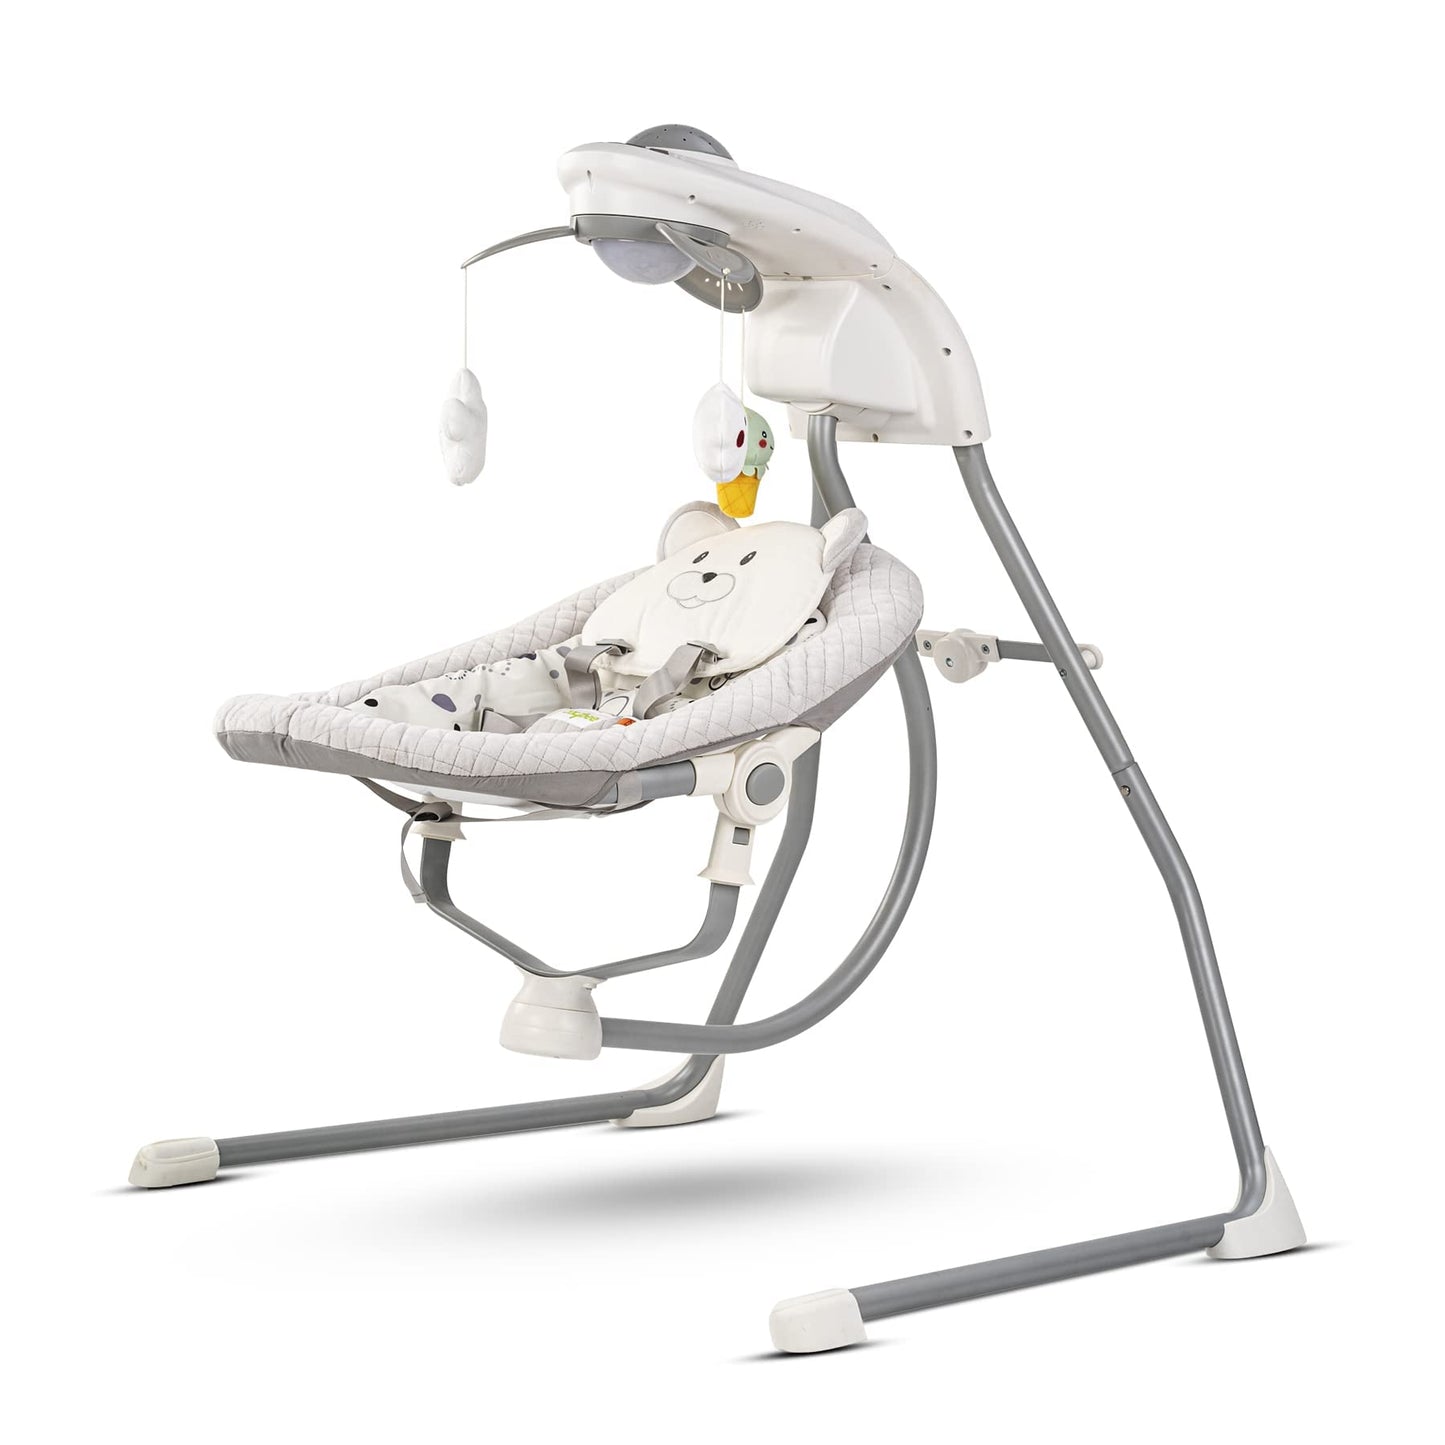 Baybee Automatic Electric Baby Swing Cradle with Adjustable Swing Speed, Soothing Vibrations, Music & Safety Belt